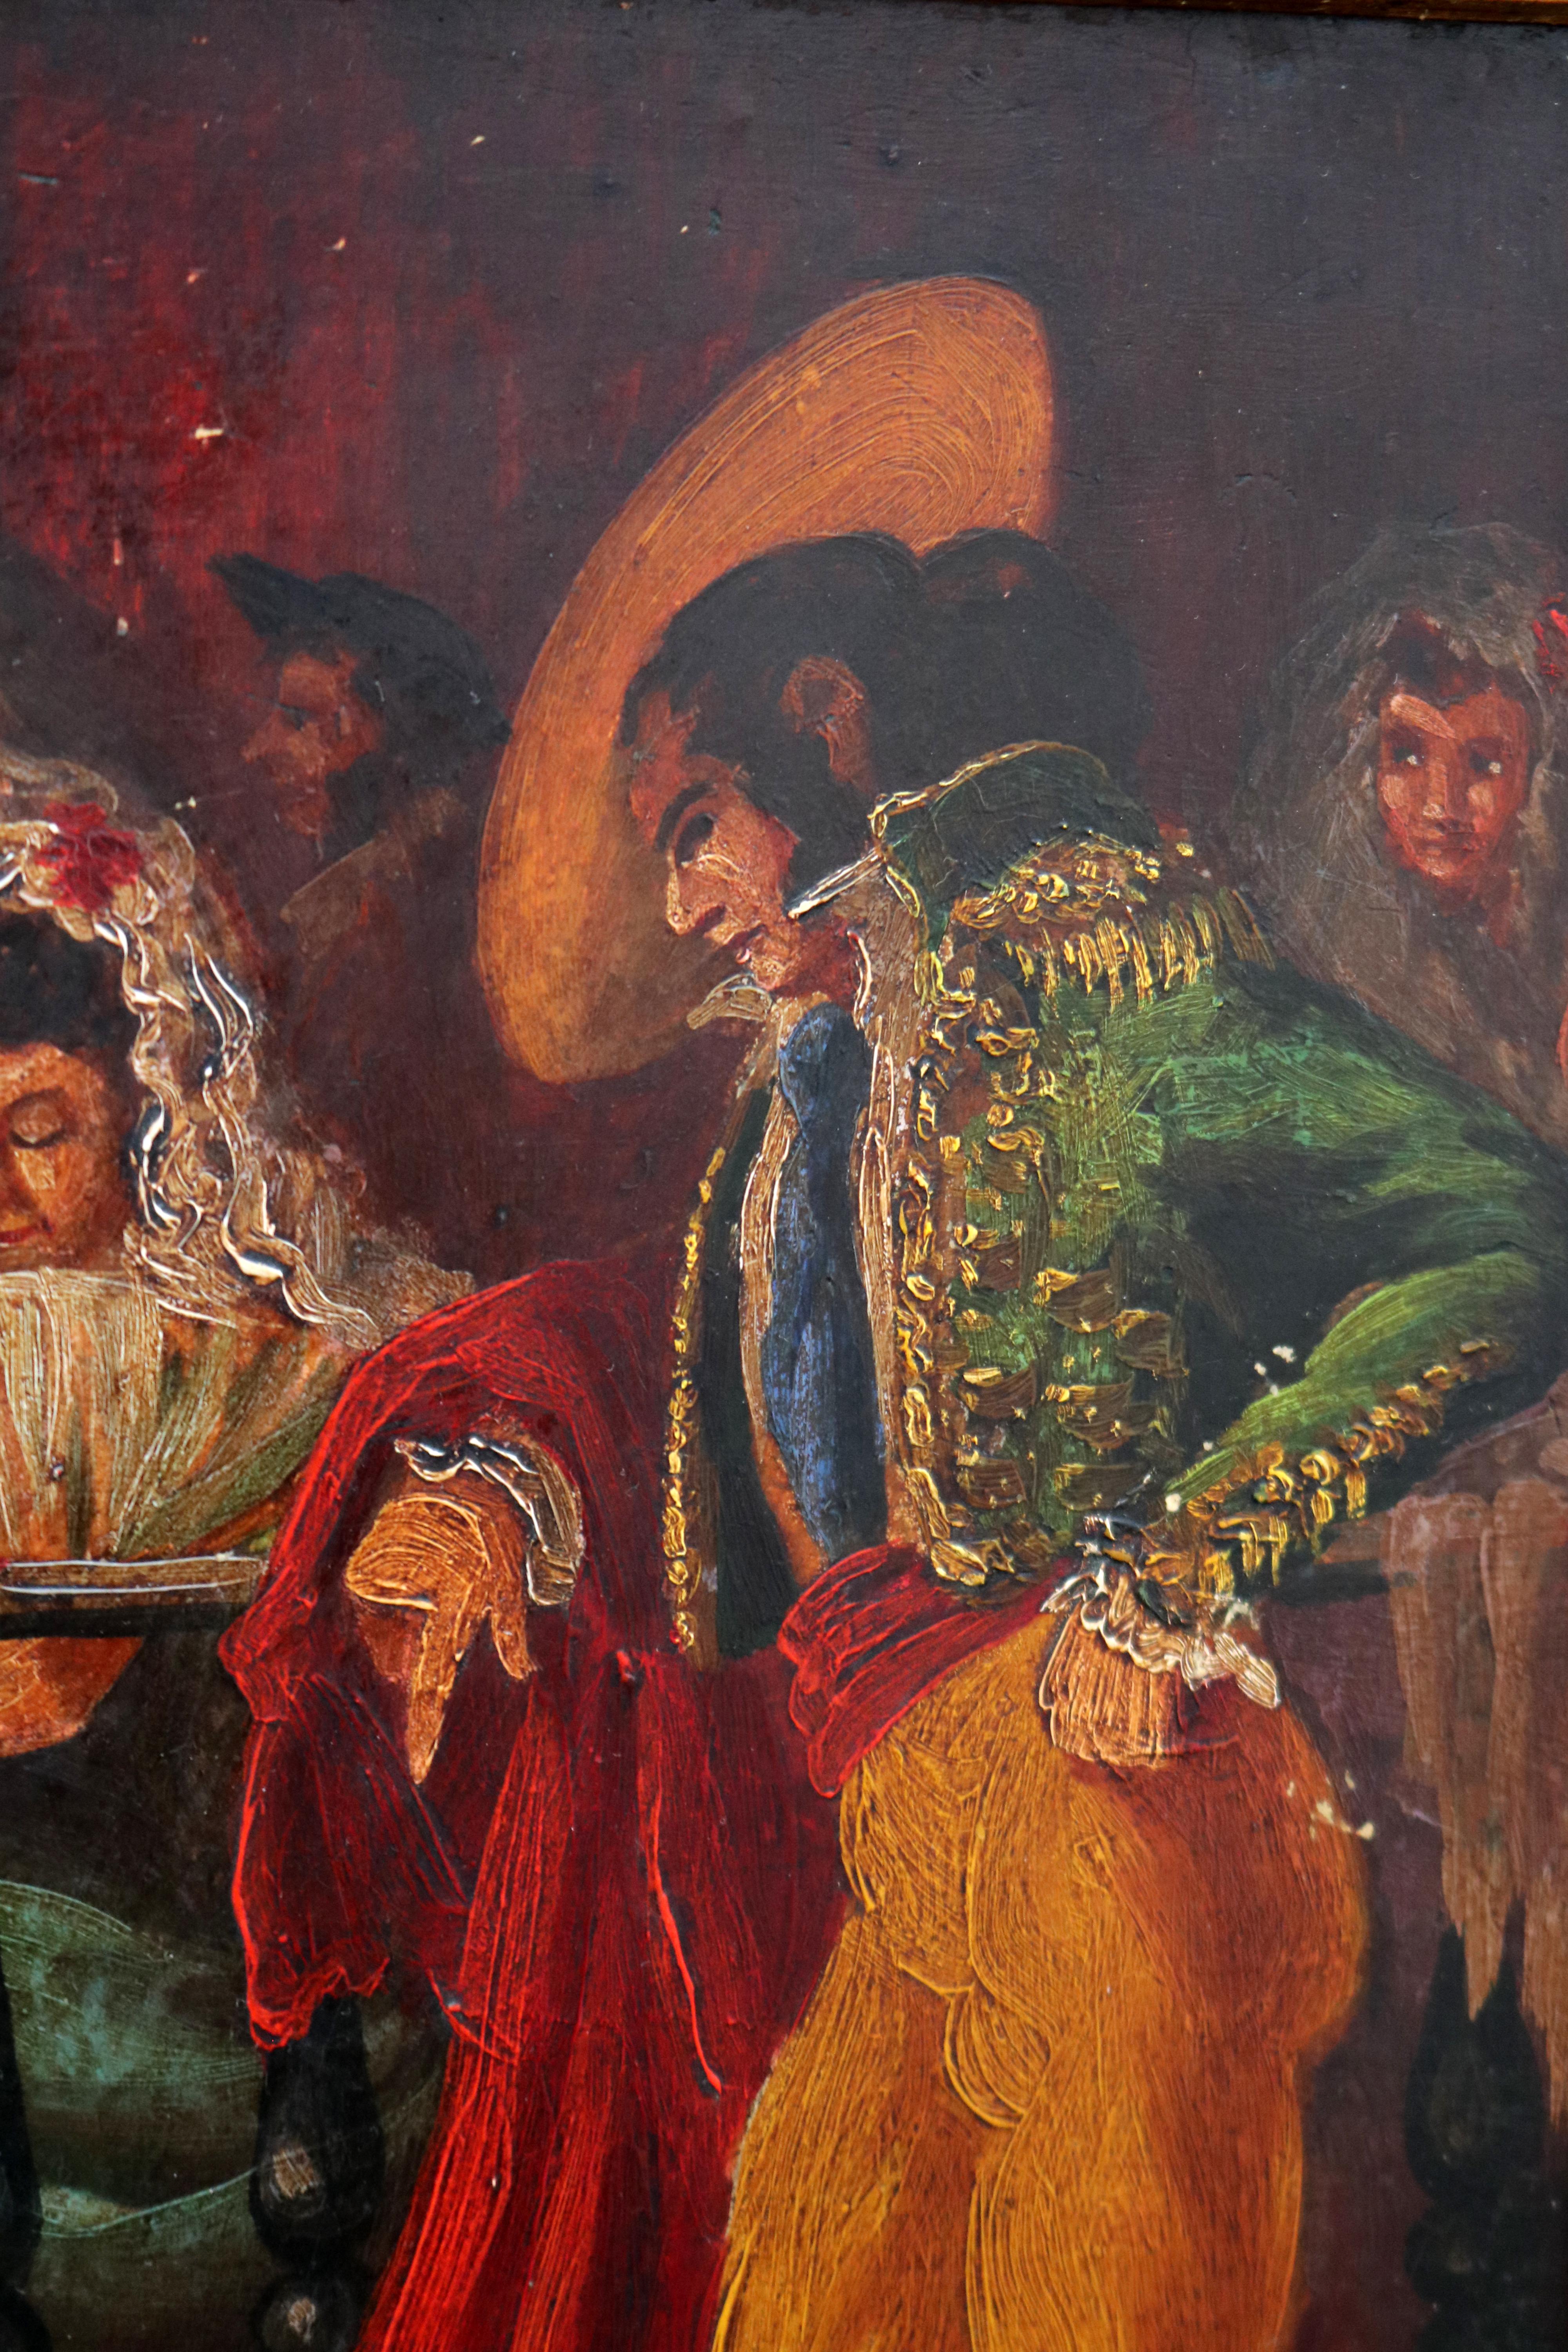 Hand-Painted 19th Century Spanish Oil on Wood Painting in Bullfighter Style For Sale